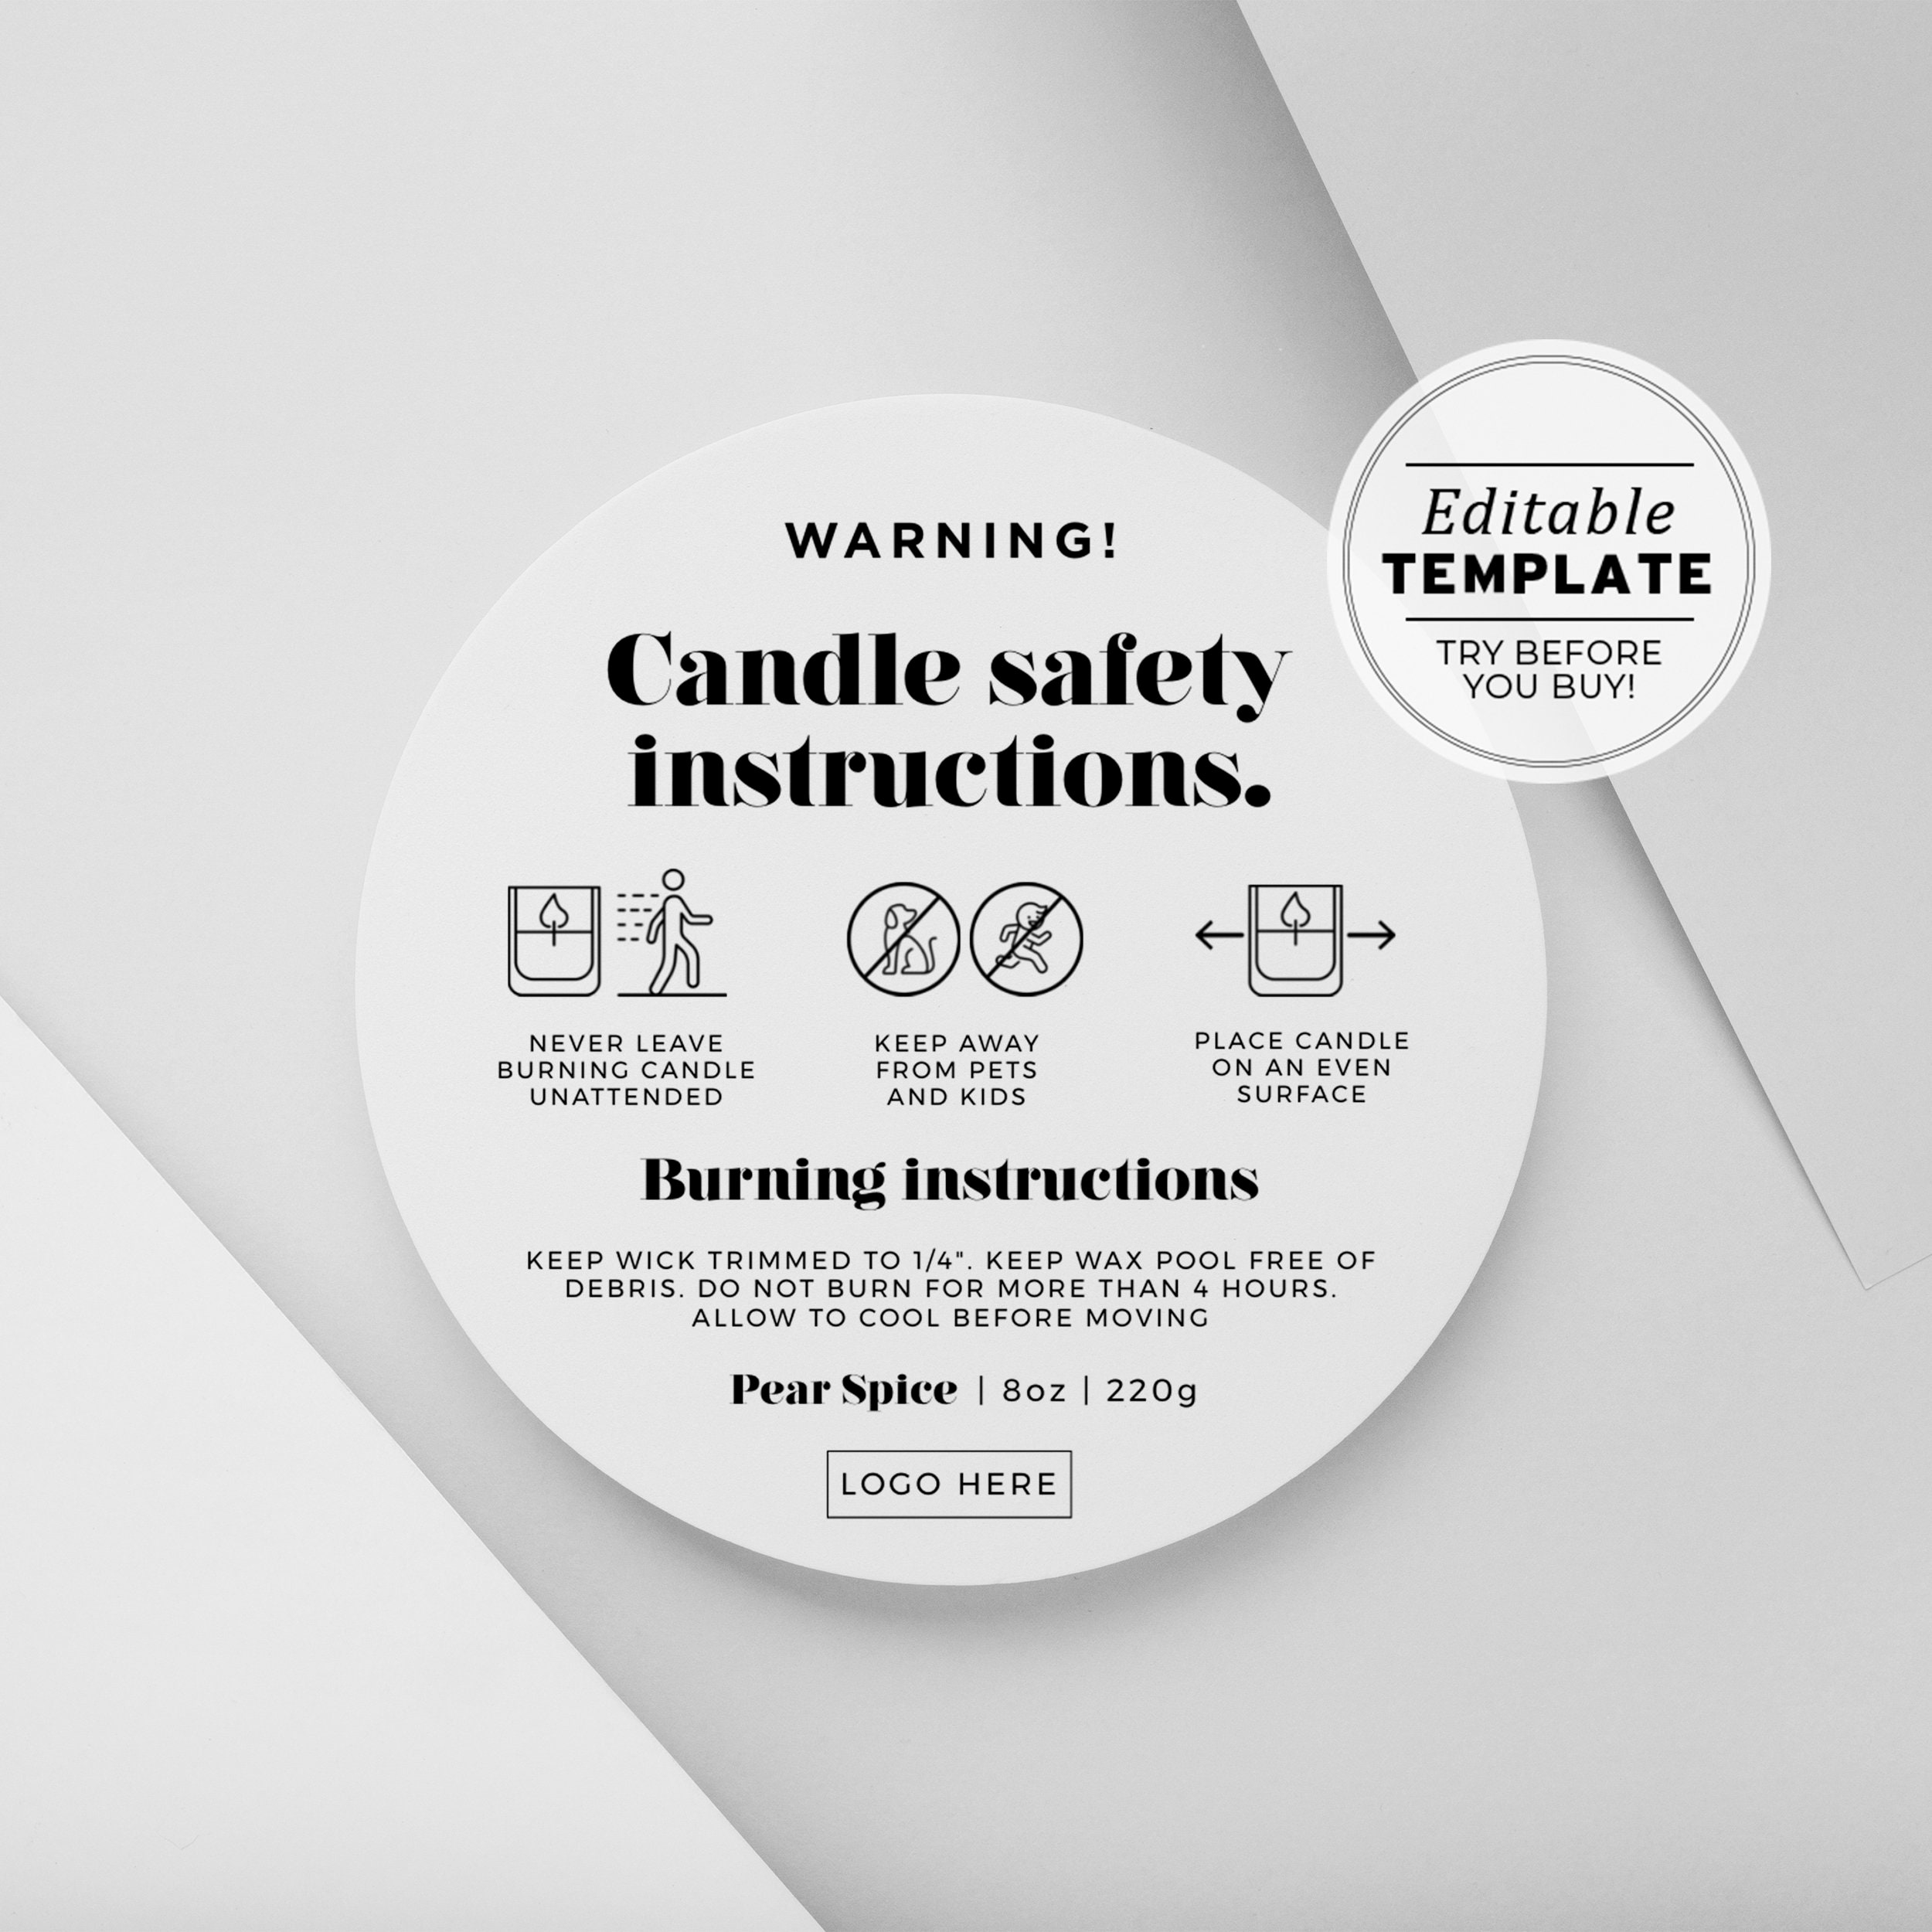 XYSMZM 1000 Pcs Candle Warning Labels,1.5 Inch Candle Safety Stickers for  Candle Making DIY Candle Jars, Multicolor